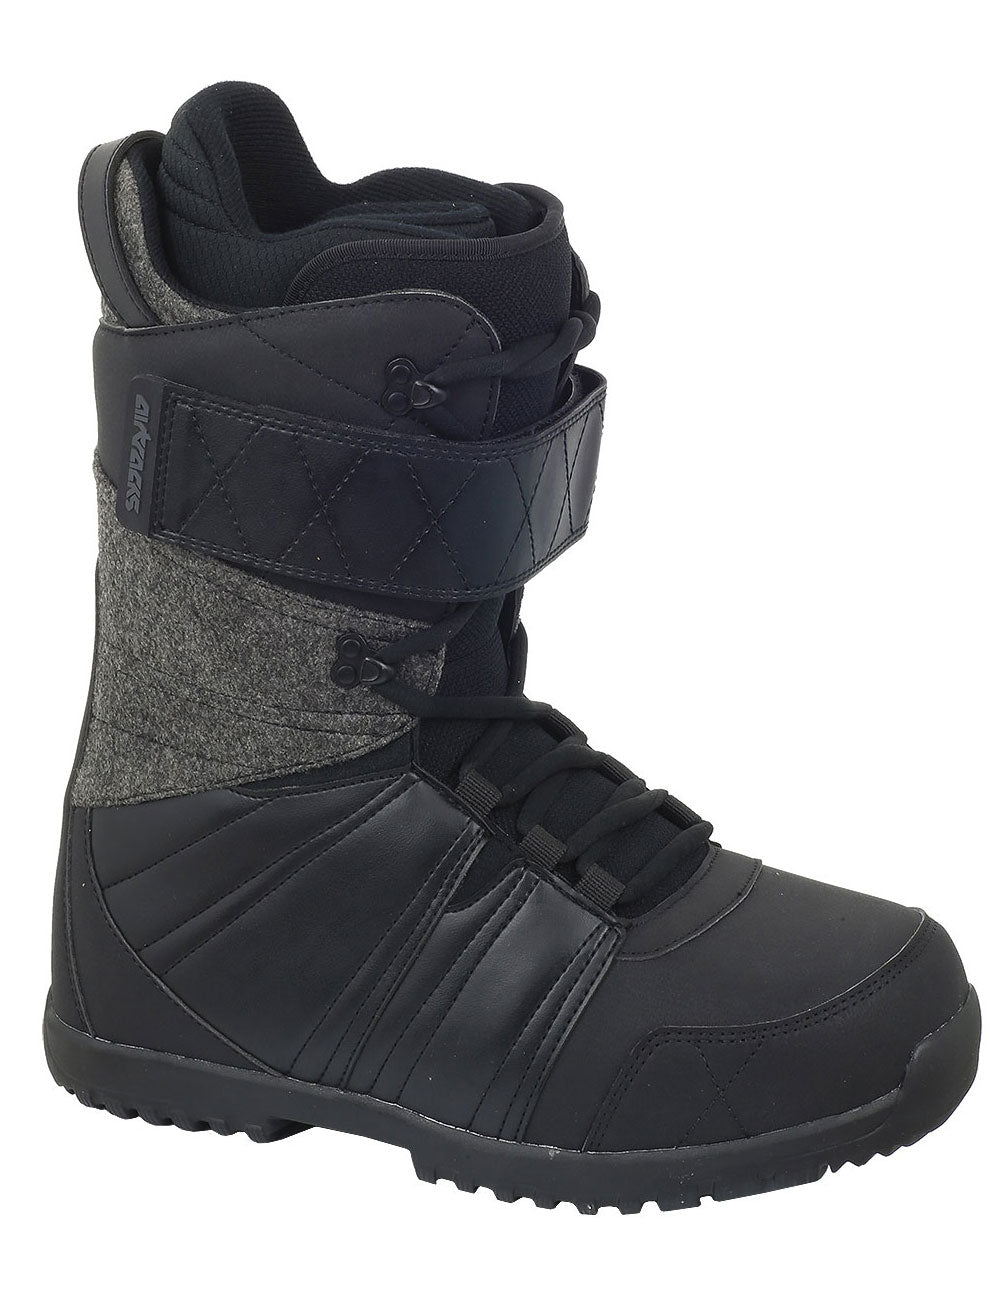 snowboard-boots-softboots-herren-damen-star-normal-lace-quick-lace-atop-boa-fast-lace-39-40-41-42-43-44-45-46